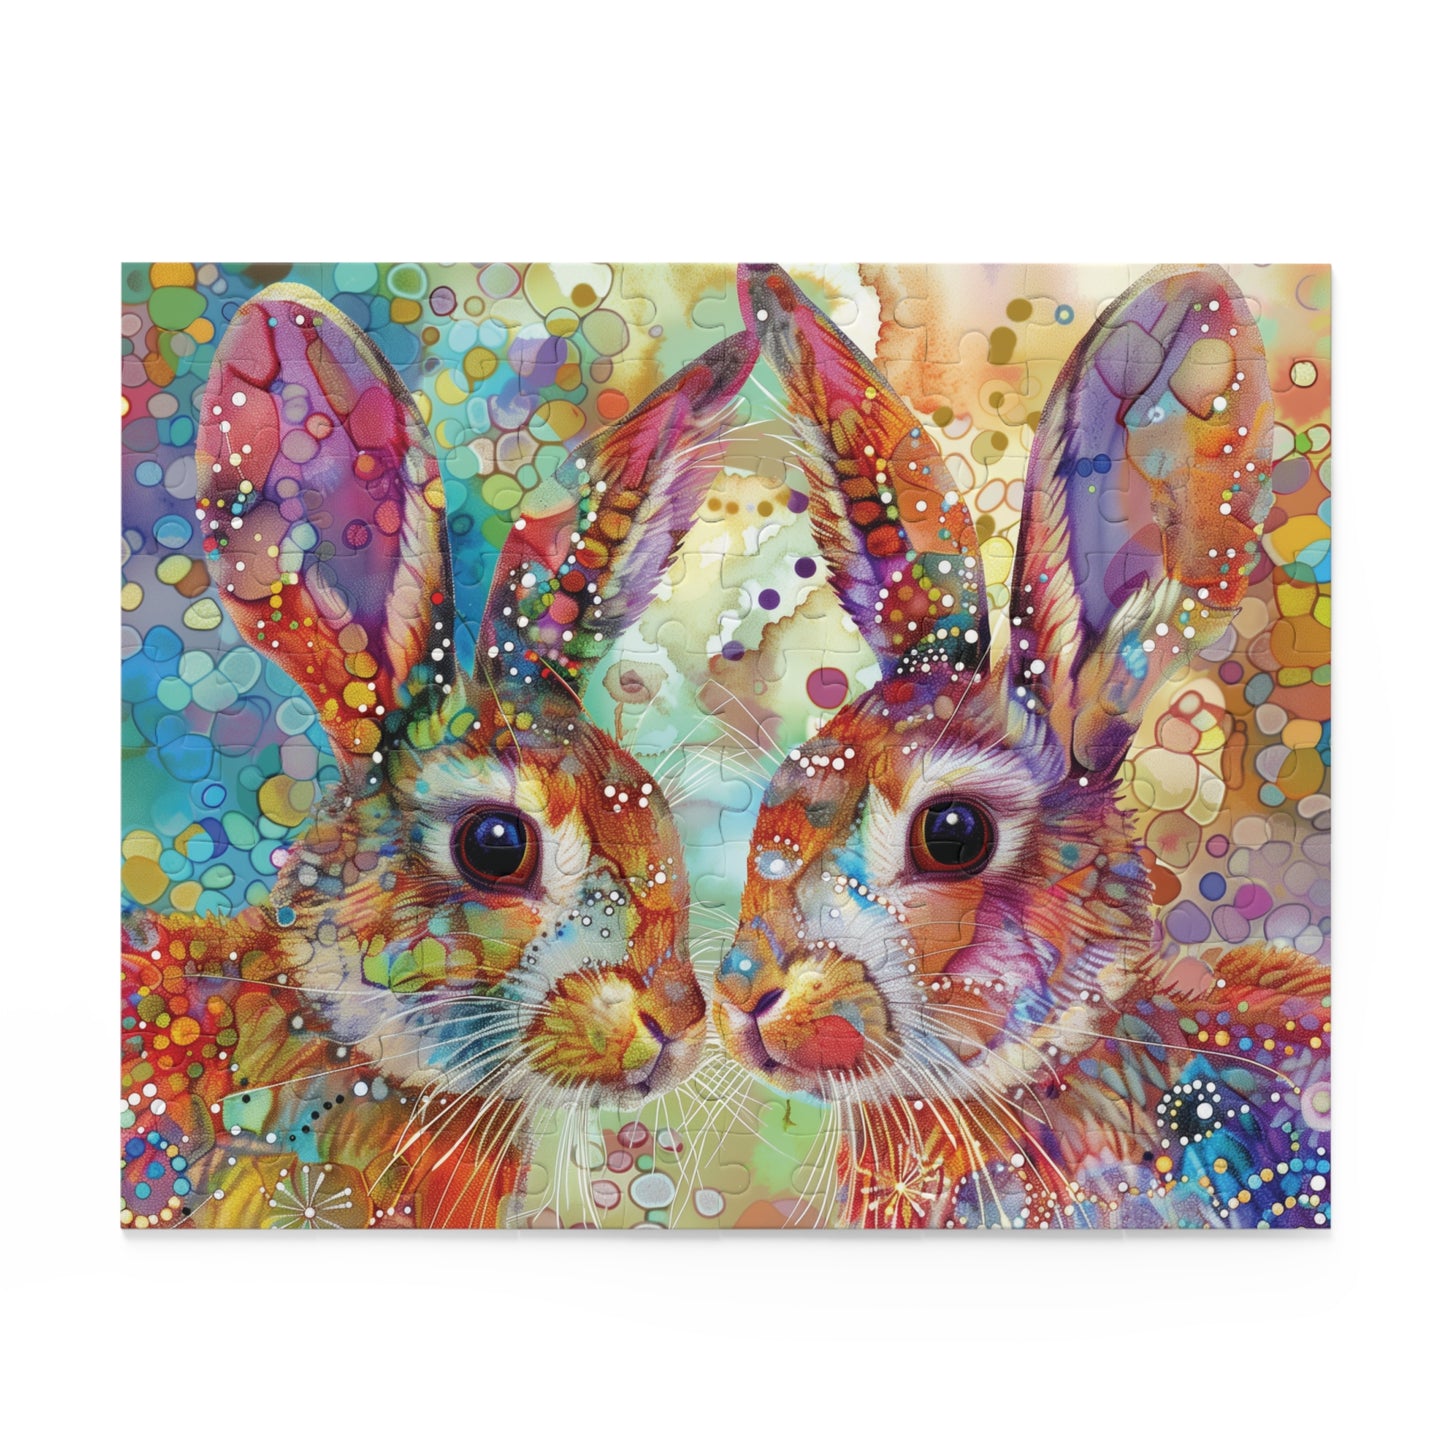 Rabbit Puzzle, Bunny Jigsaw Puzzle, Colorful Bunny Puzzle, Artistic Rabbit Puzzle, 120 pieces, 252 pieces, 500 pieces, Family Game Puzzle